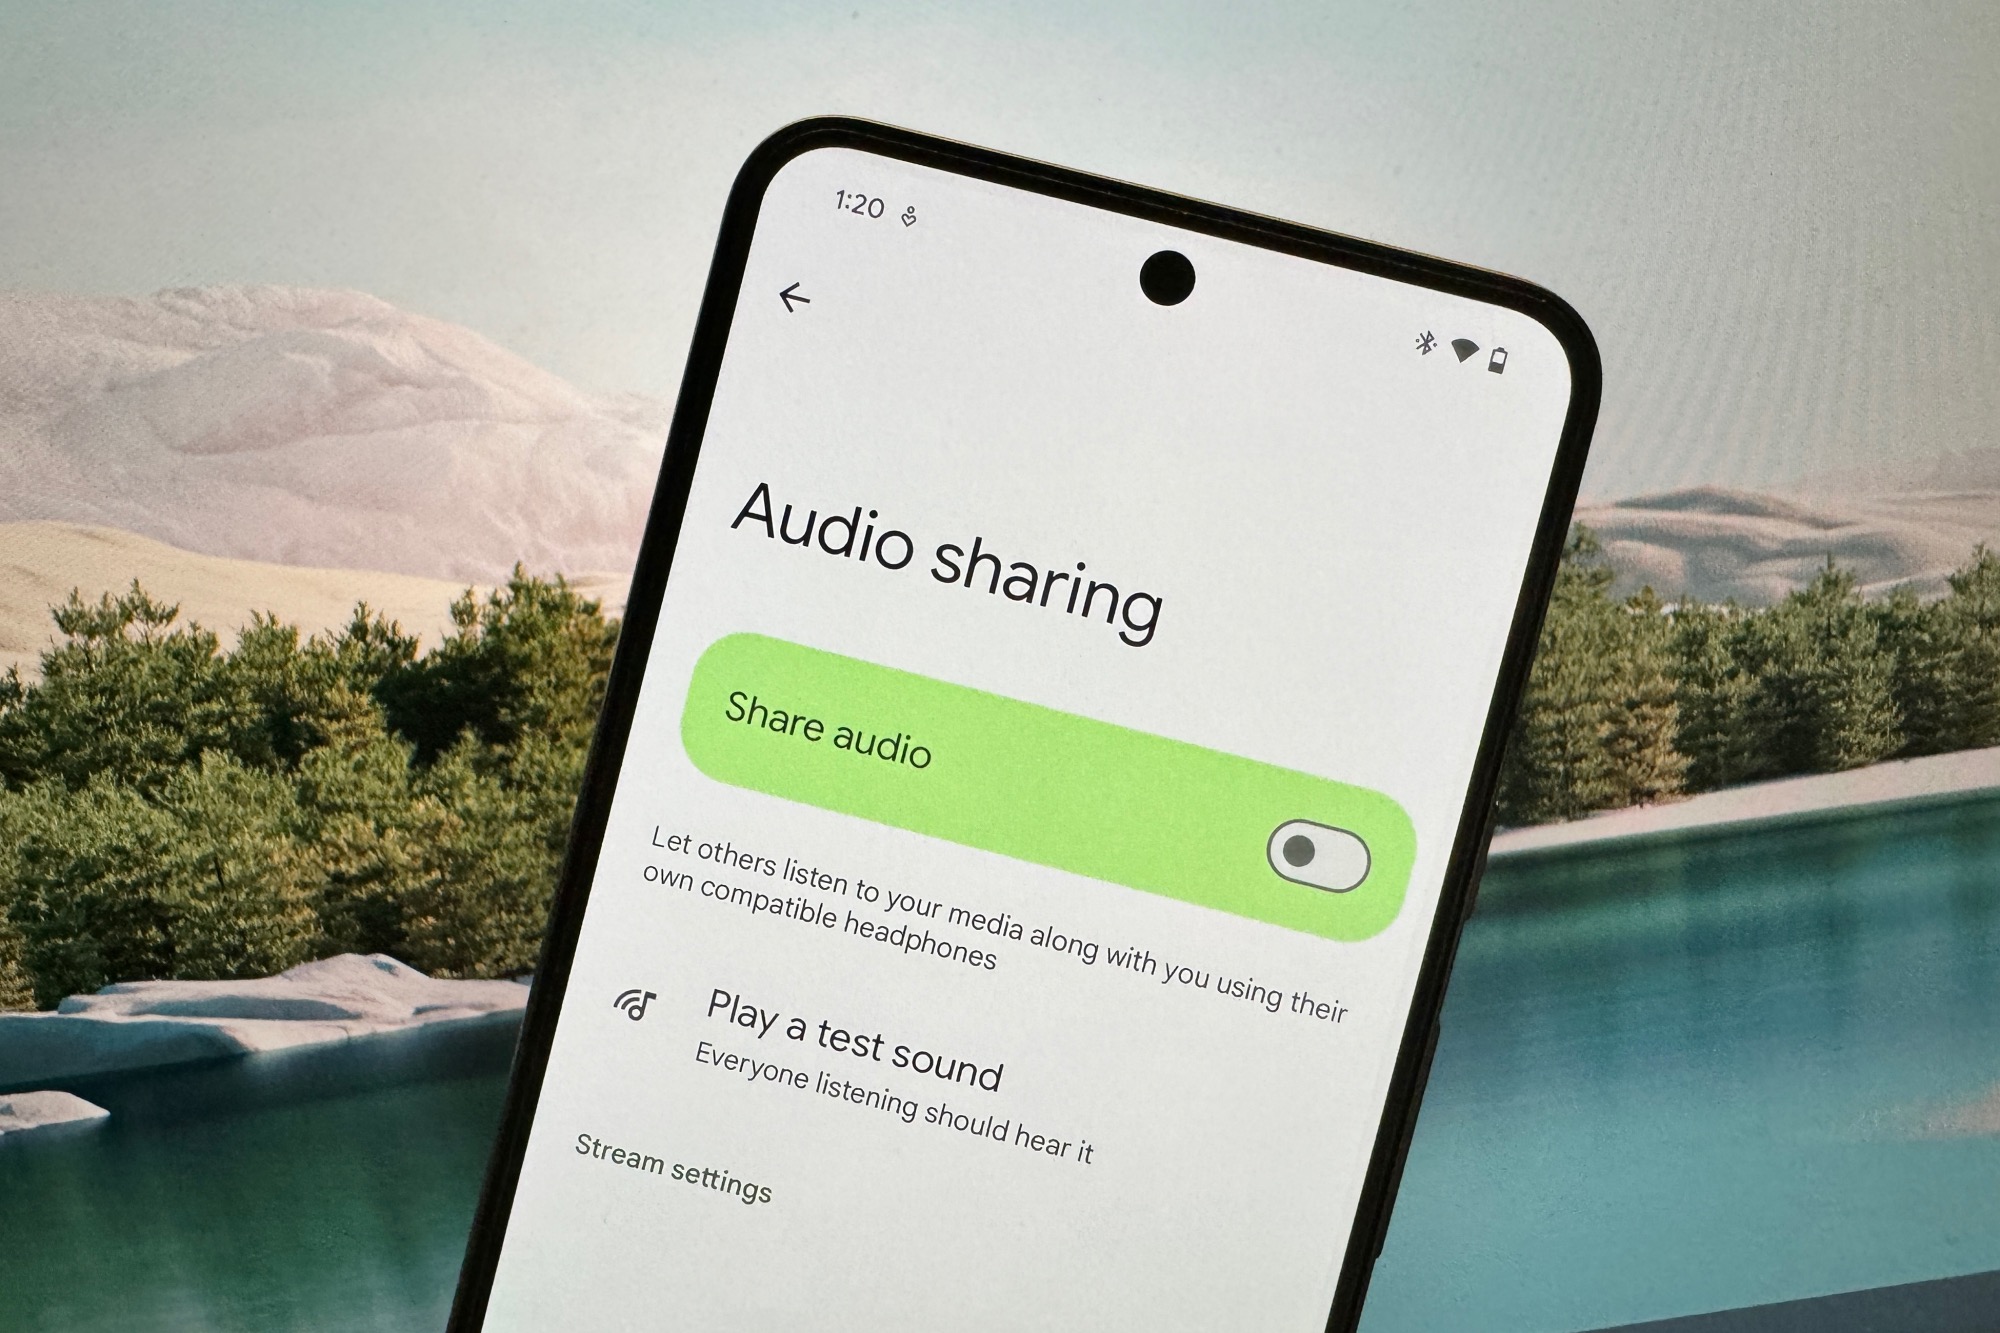 Audio sharing system in Android 15.